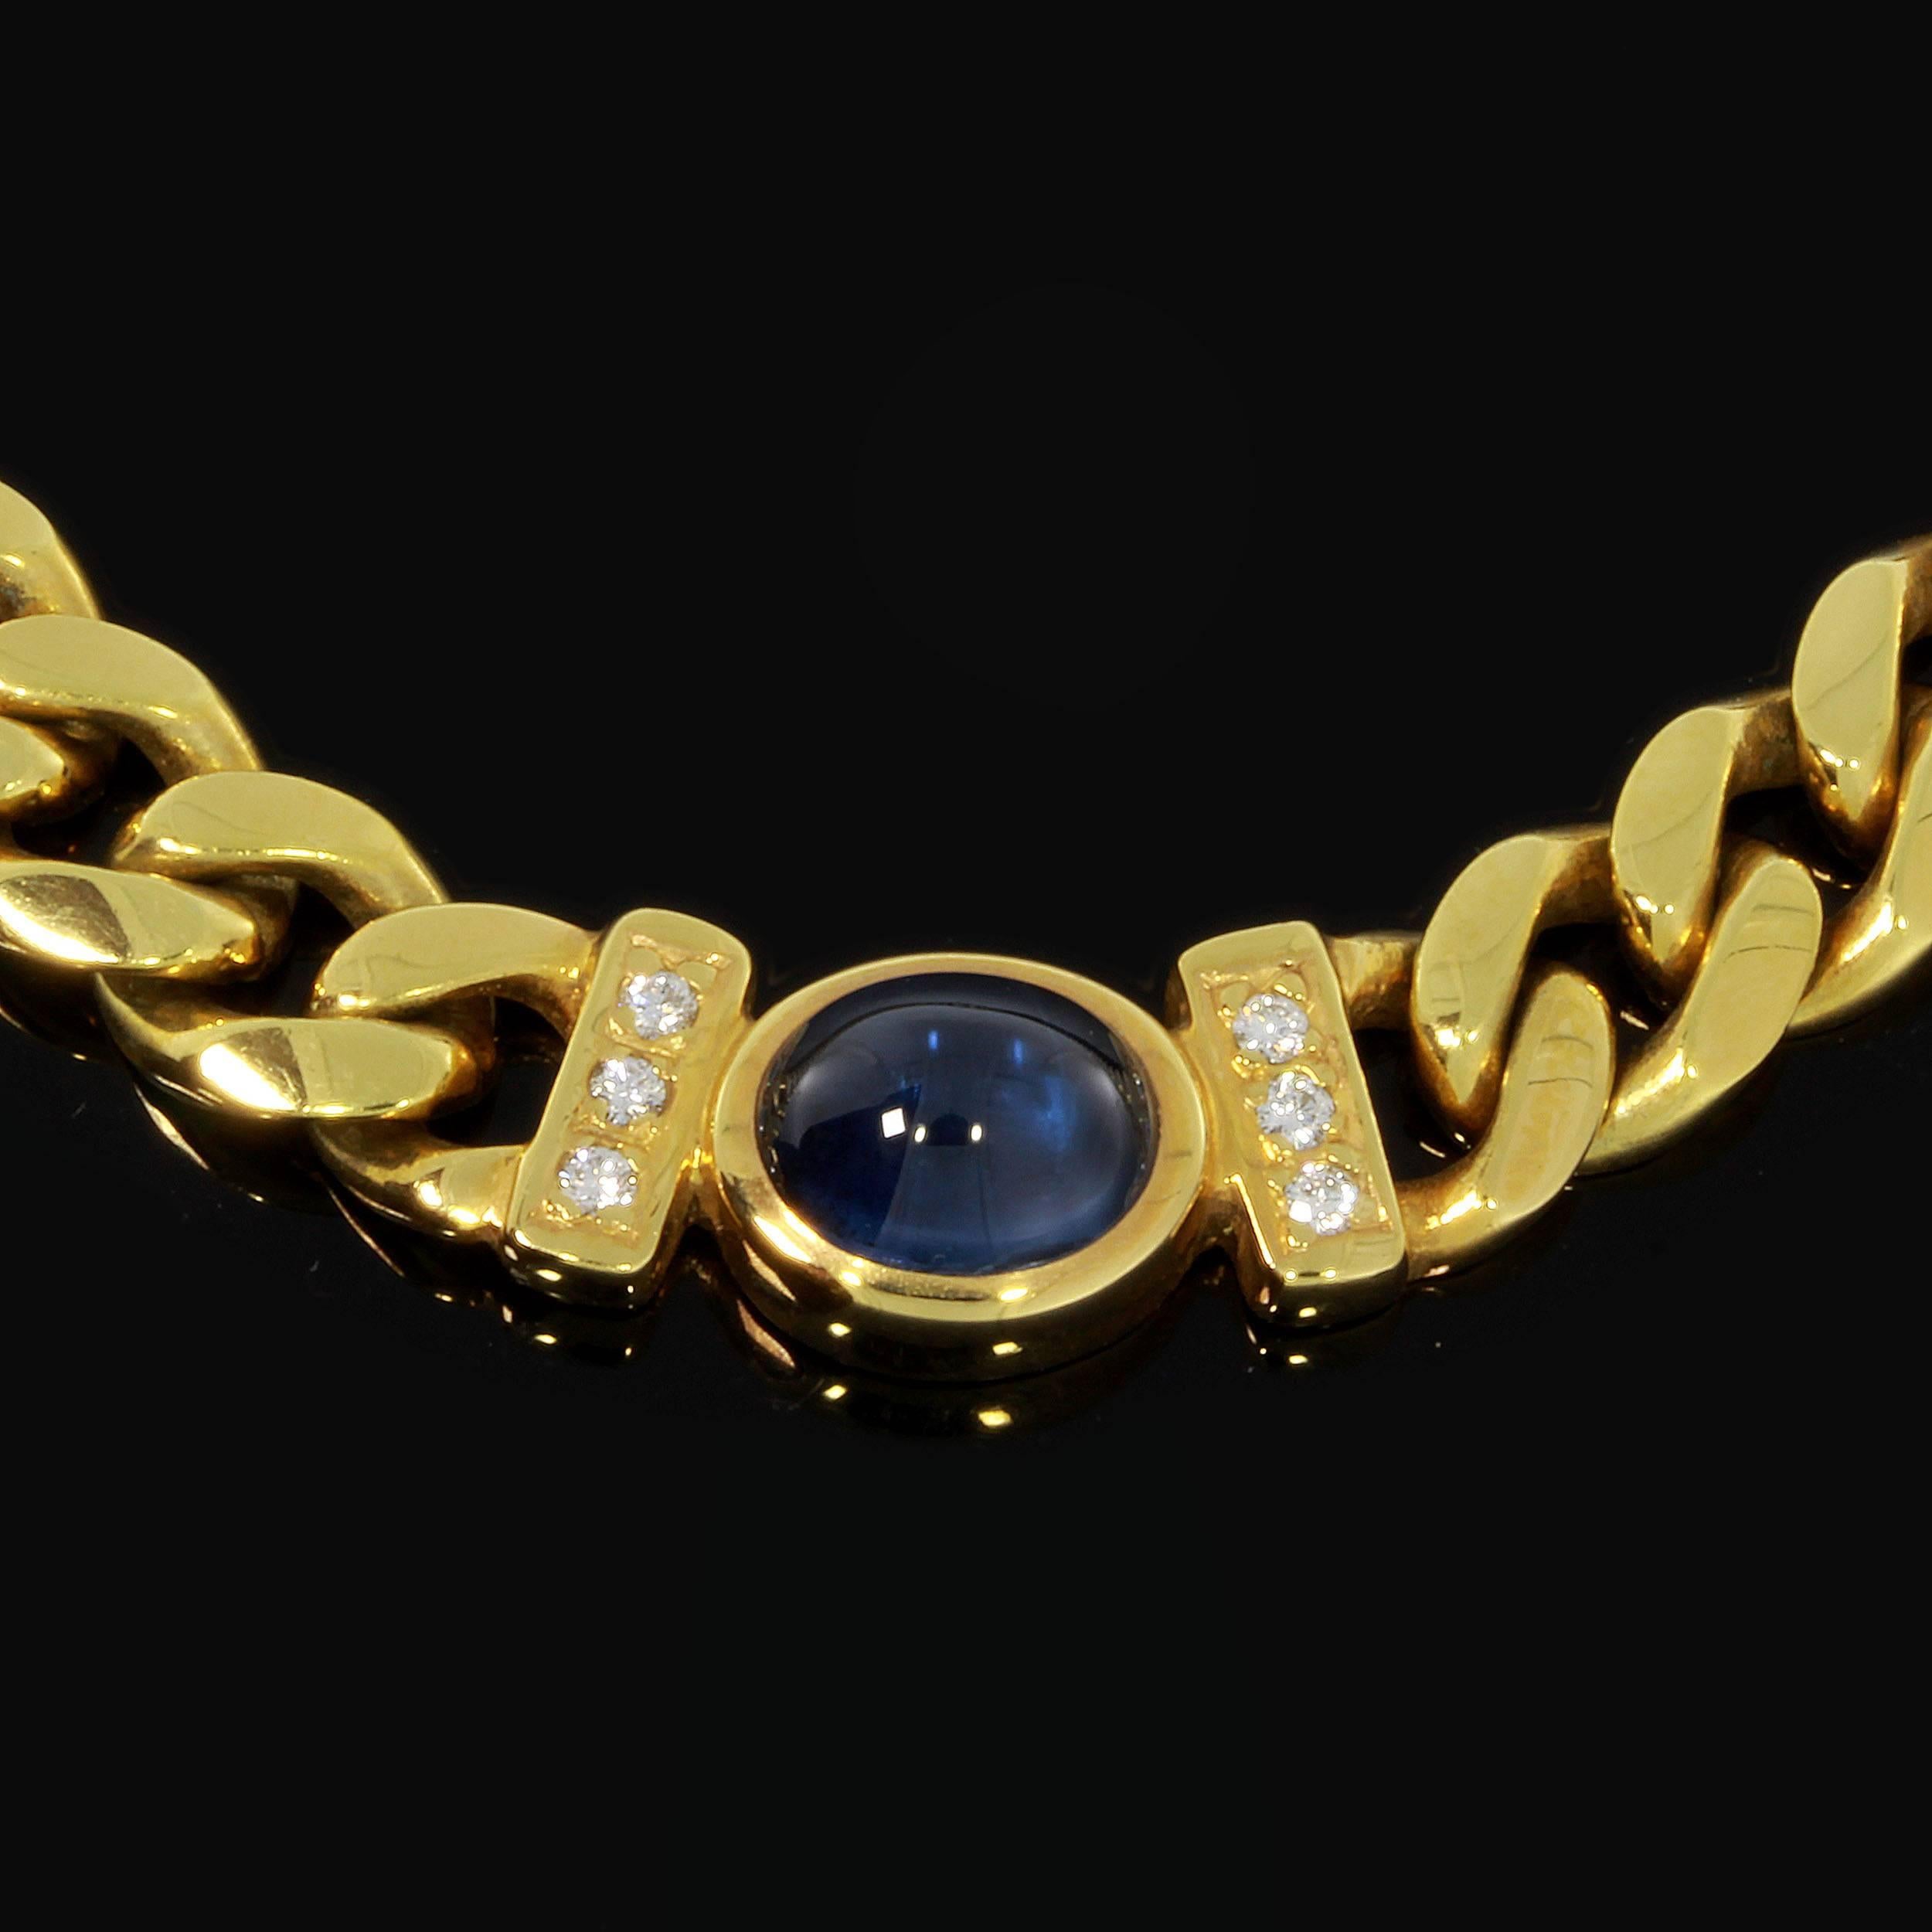 A beautiful design by Scheurle ( Quinn ), Schwäbisch Gmünd, Germany 1990s. 
Studded Necklace with a deep blue sapphire cabochon surrounded by 6 diamonds circa 0,15 carats and made in 14 K yellow gold. Signed: Quinn and hallmarked with the purity